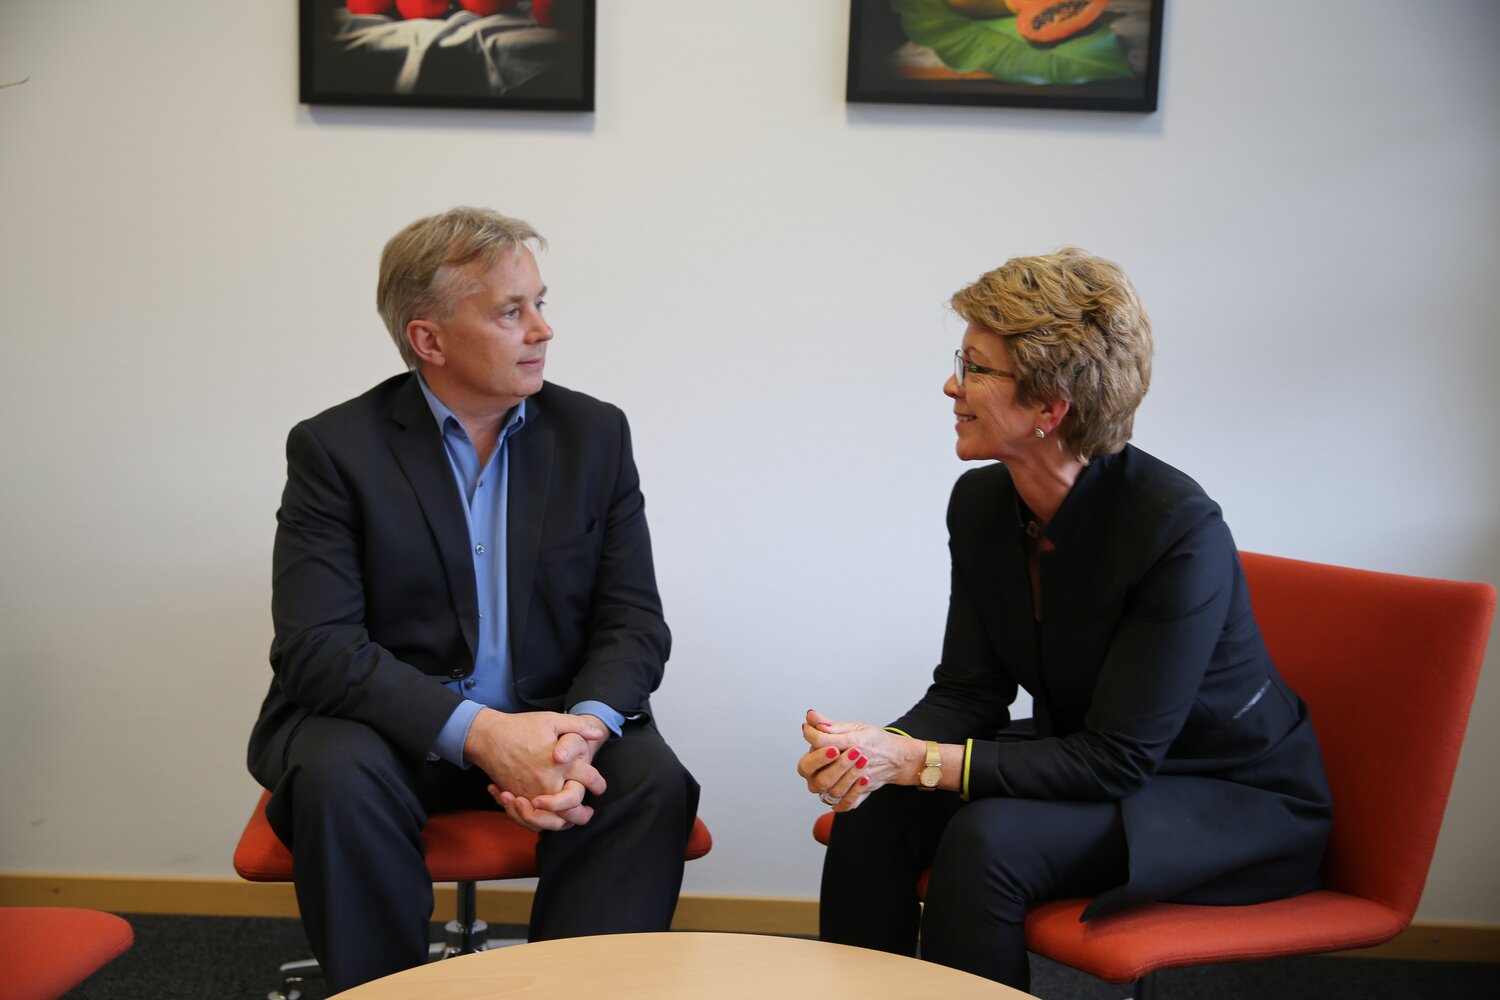 Marie Haga and Knut Storberget met at the Crop Trust headquarters in Bonn.